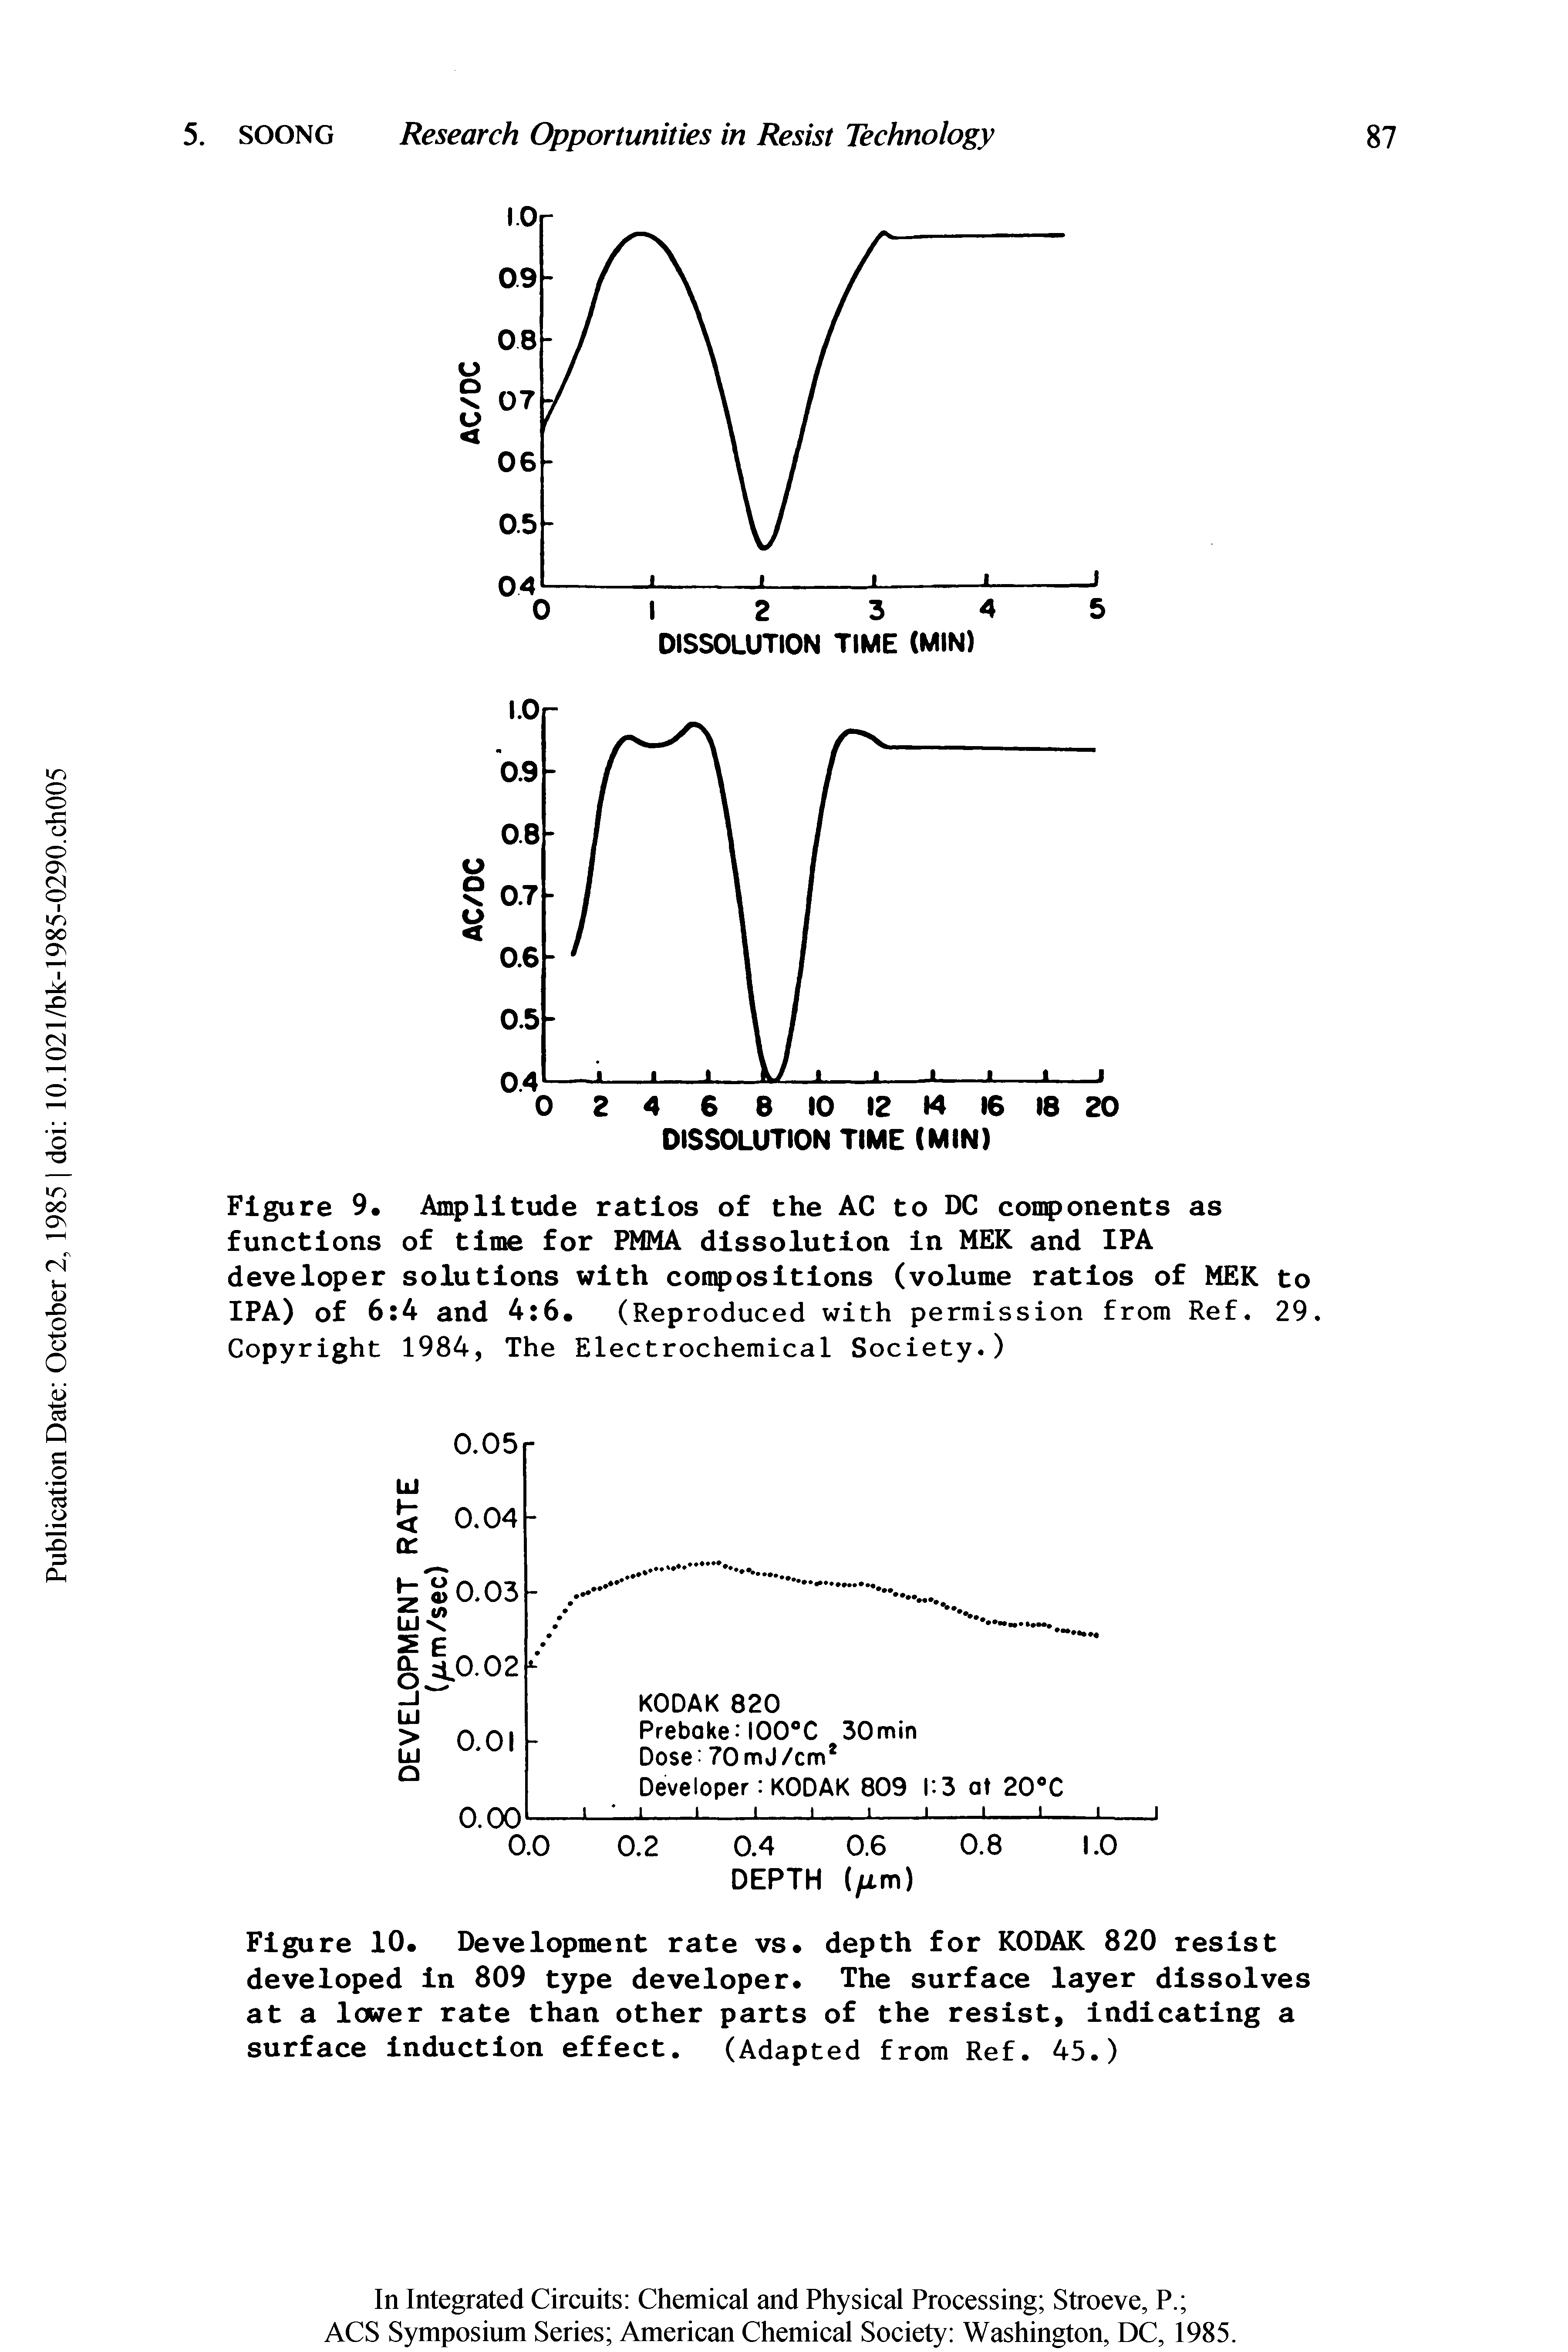 Figure 10. Development rate vs. depth for KODAK 820 resist developed in 809 type developer. The surface layer dissolves at a lower rate than other parts of the resist, indicating a surface induction effect. (Adapted from Ref. 45.)...